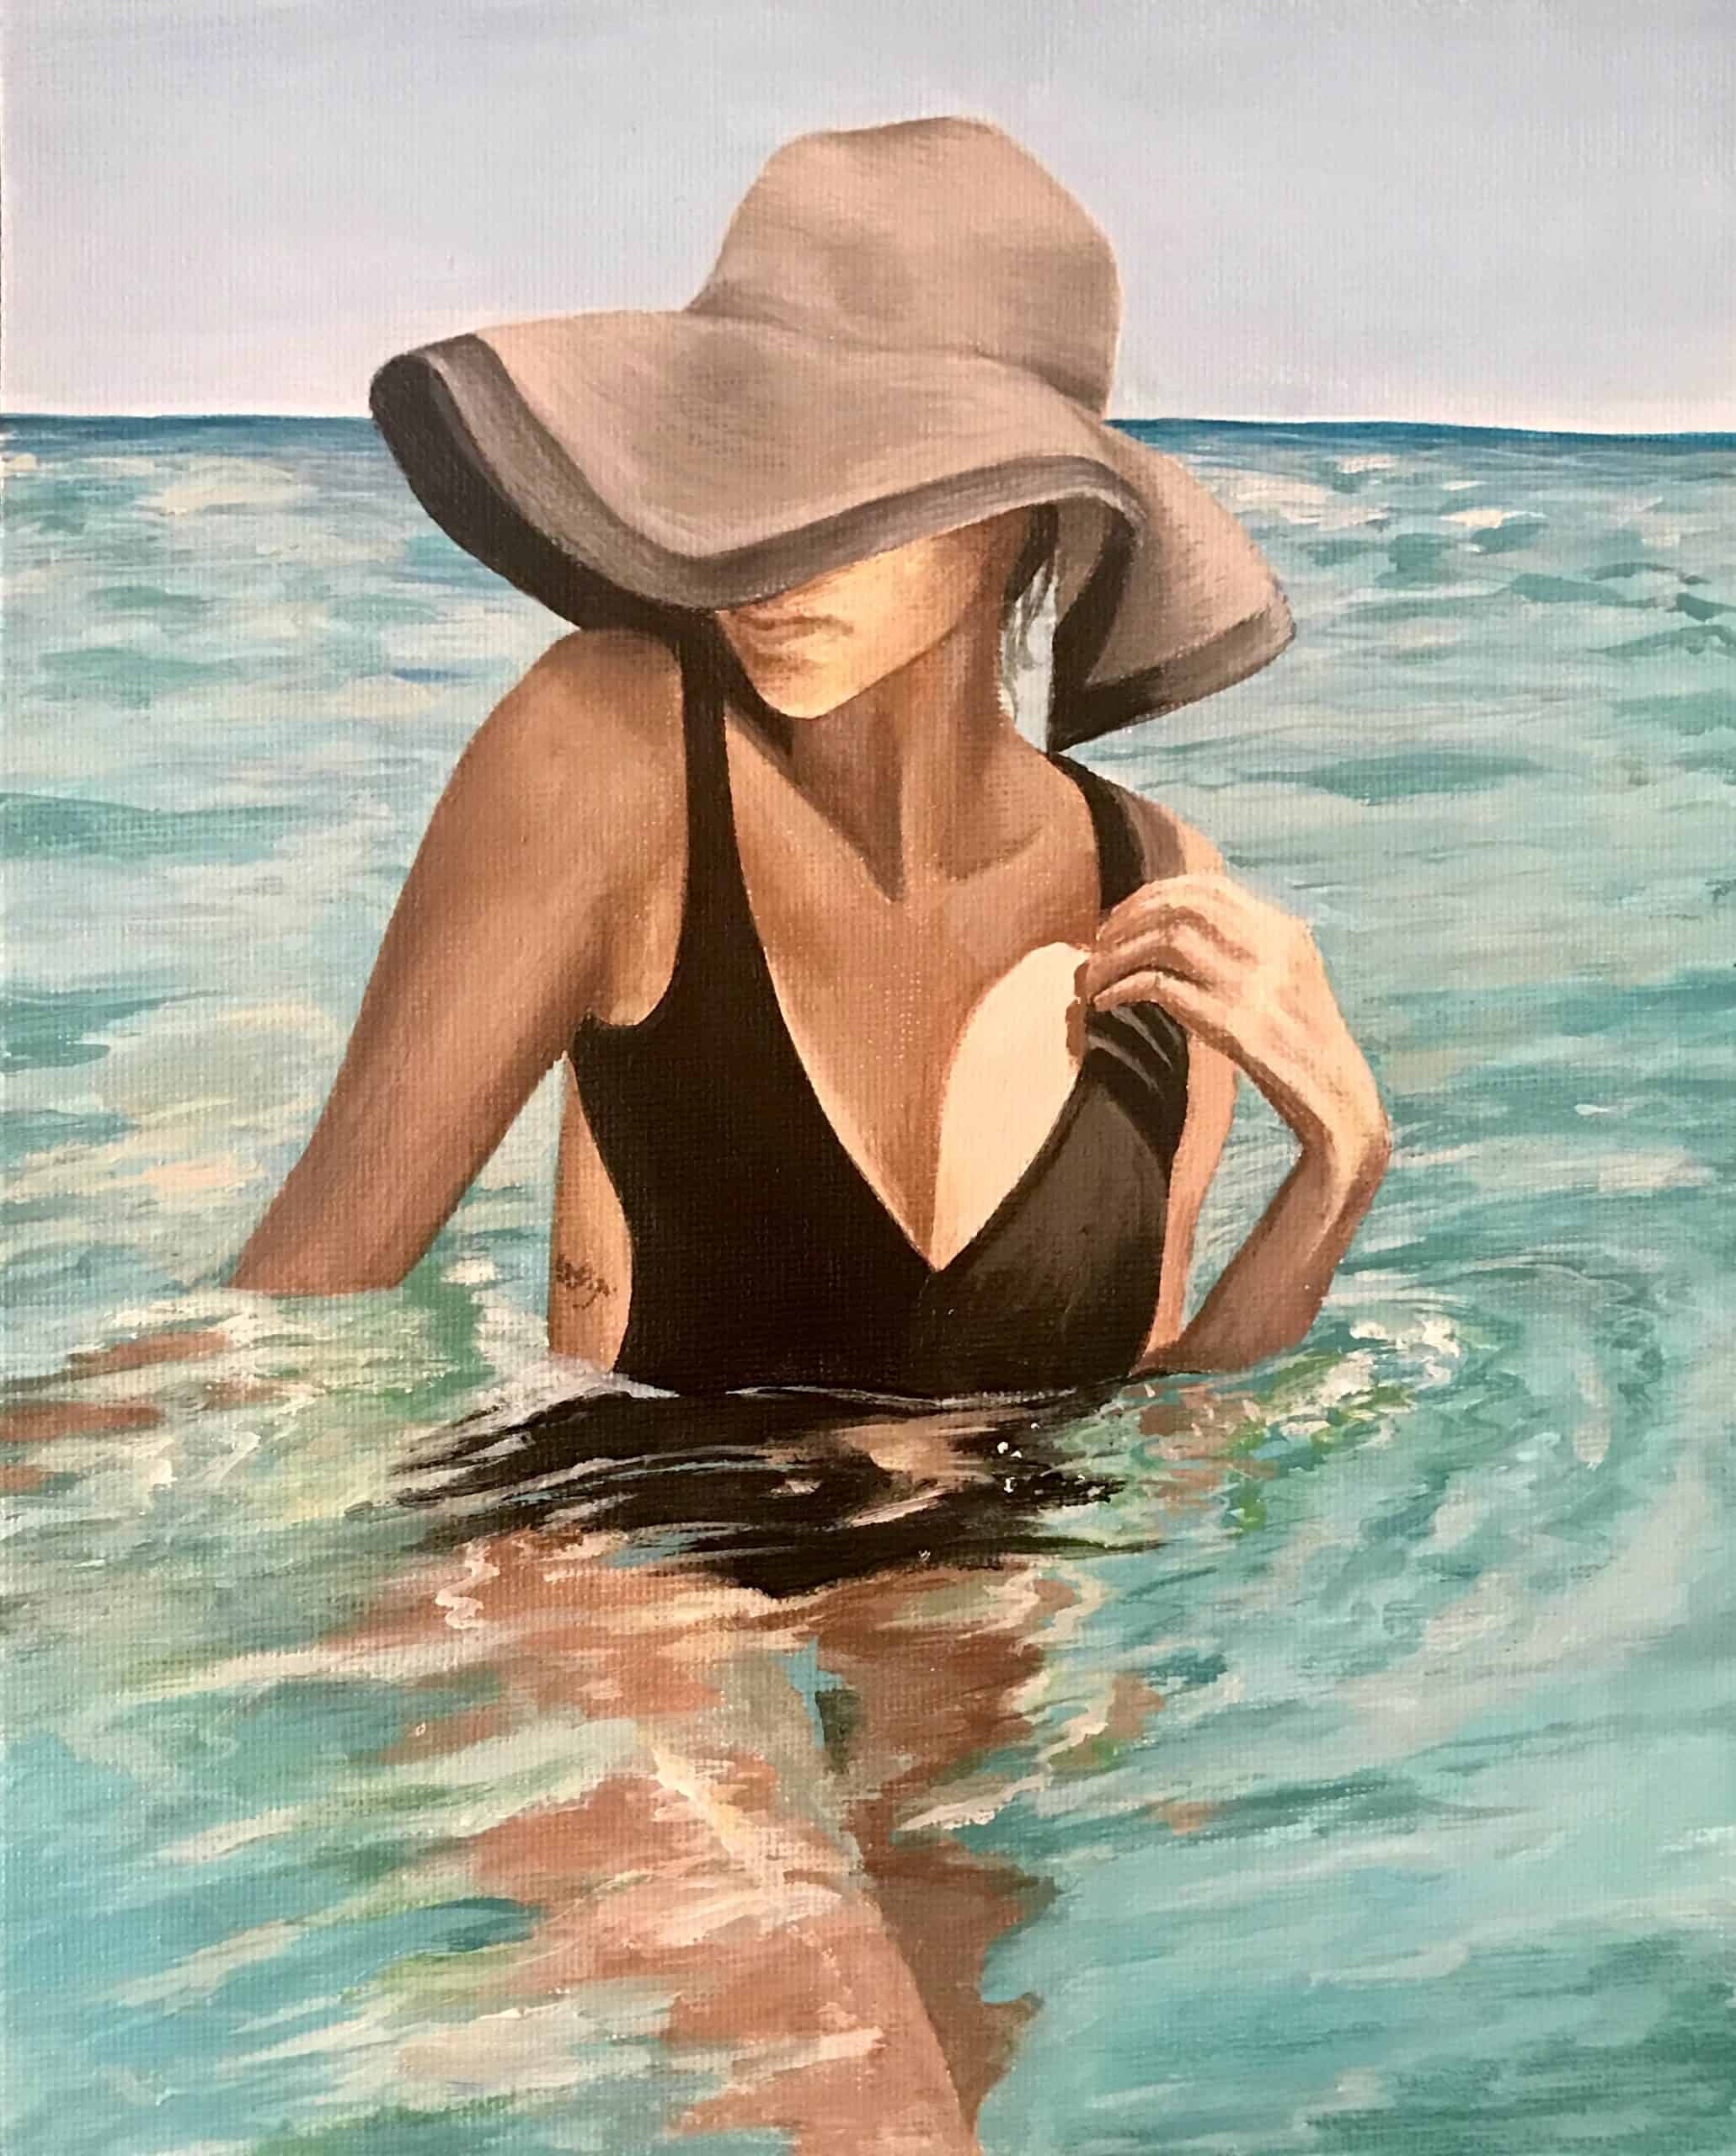 Painting of Woman in Water with Large Beach Hat